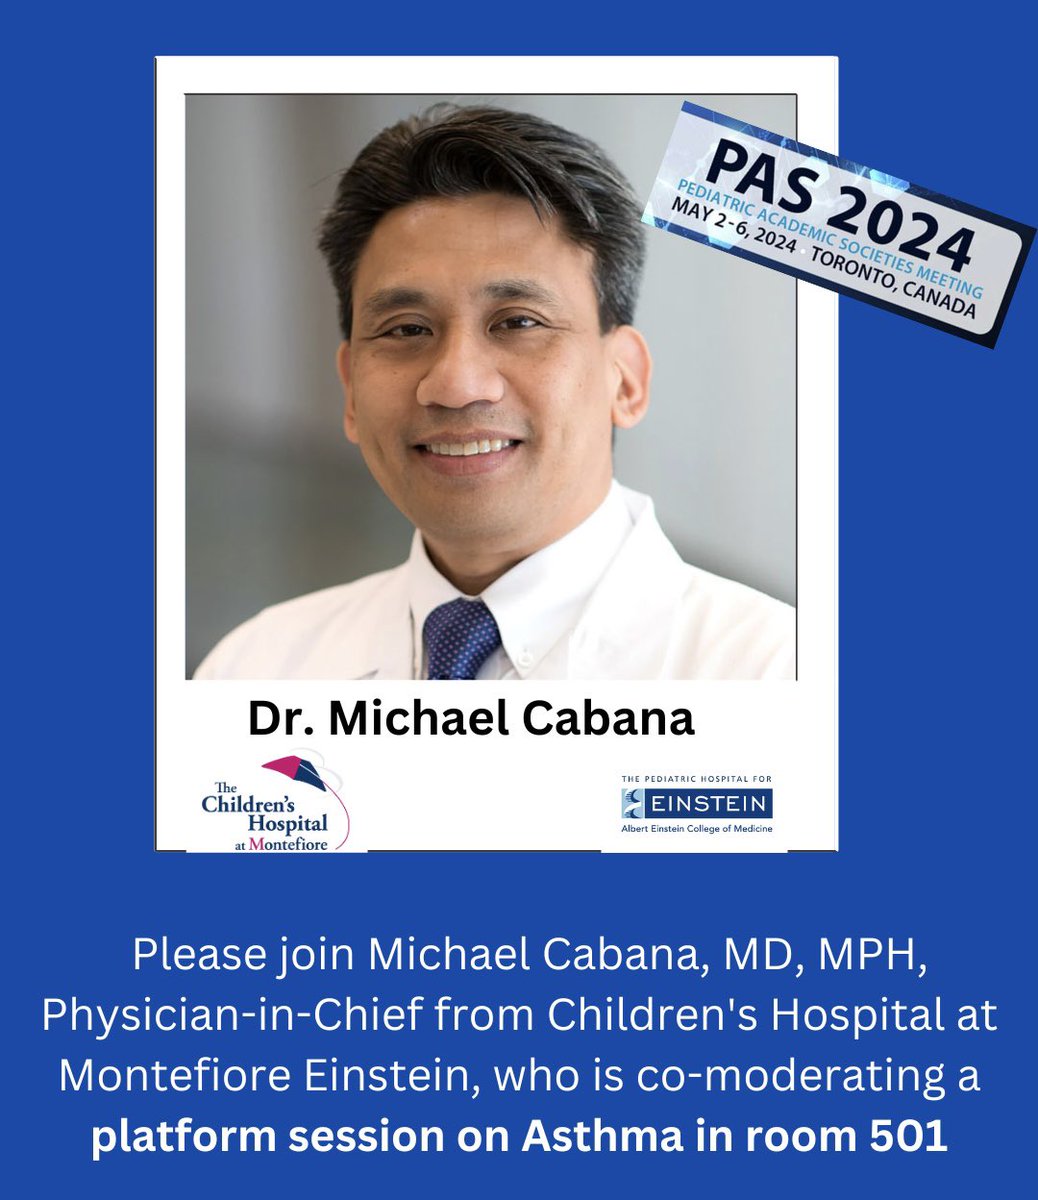 Come learn about innovations in #Asthma care at a platform talk this morning co-moderated by @cabanam, Physician-in-Chief at #CHAM ! #pas2024 @PASMeeting @MontefioreNYC @EinsteinMed